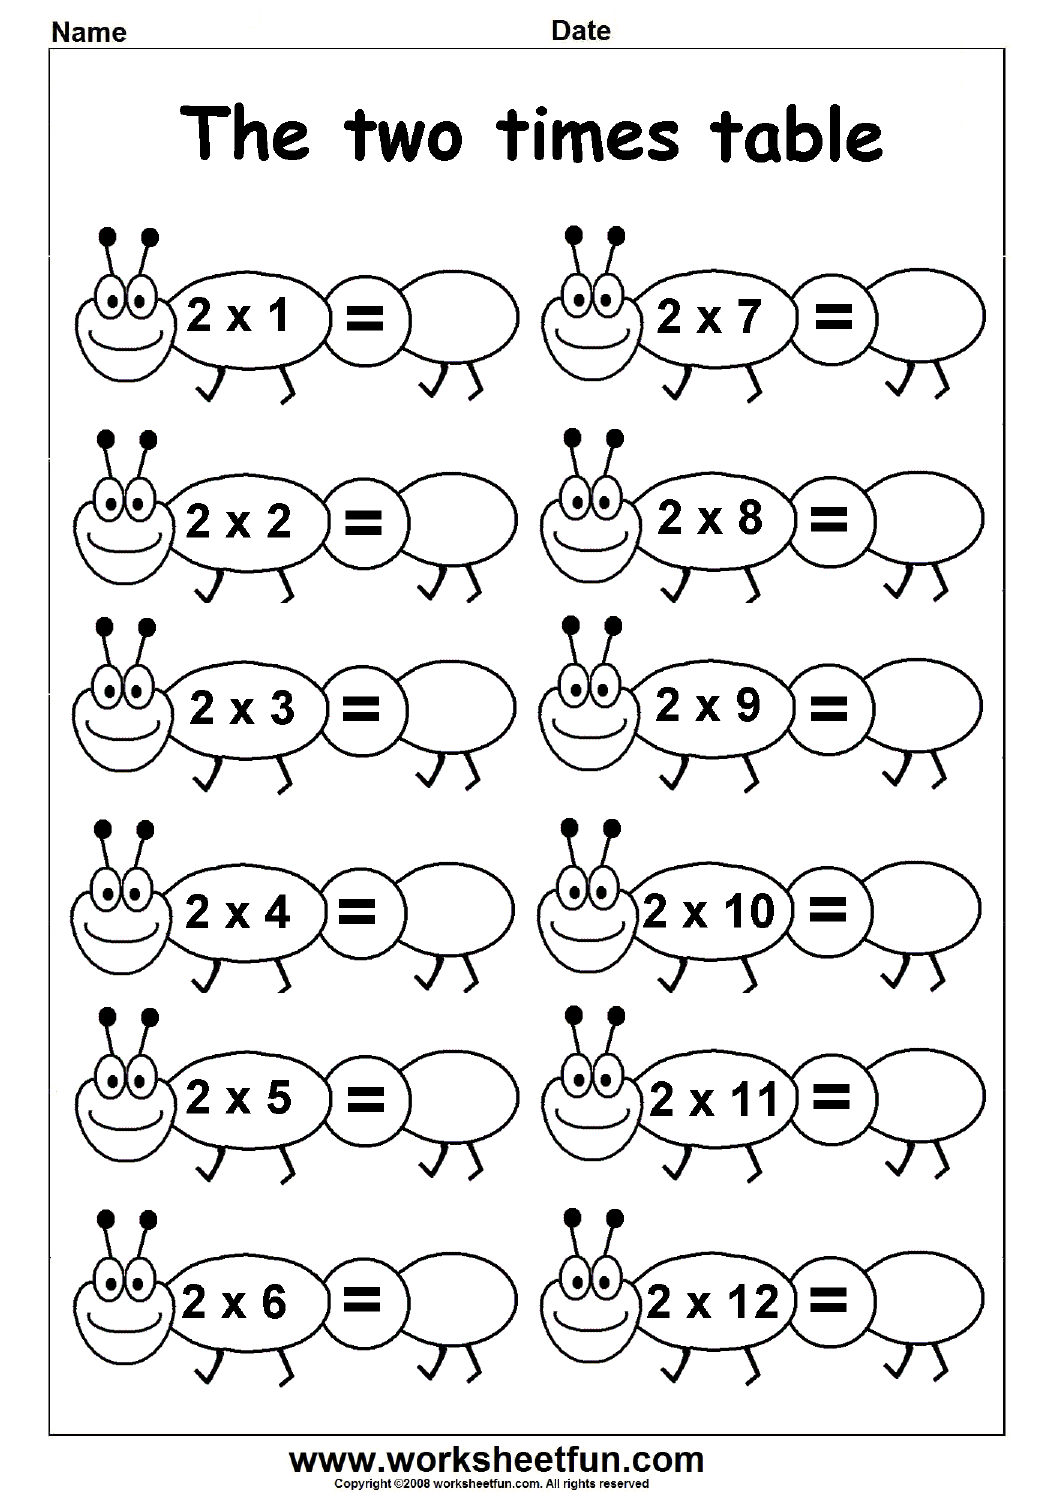  Multiplication Times Tables Worksheets 2 3 4 5 6 7 Times Tables Six Worksheets FREE 